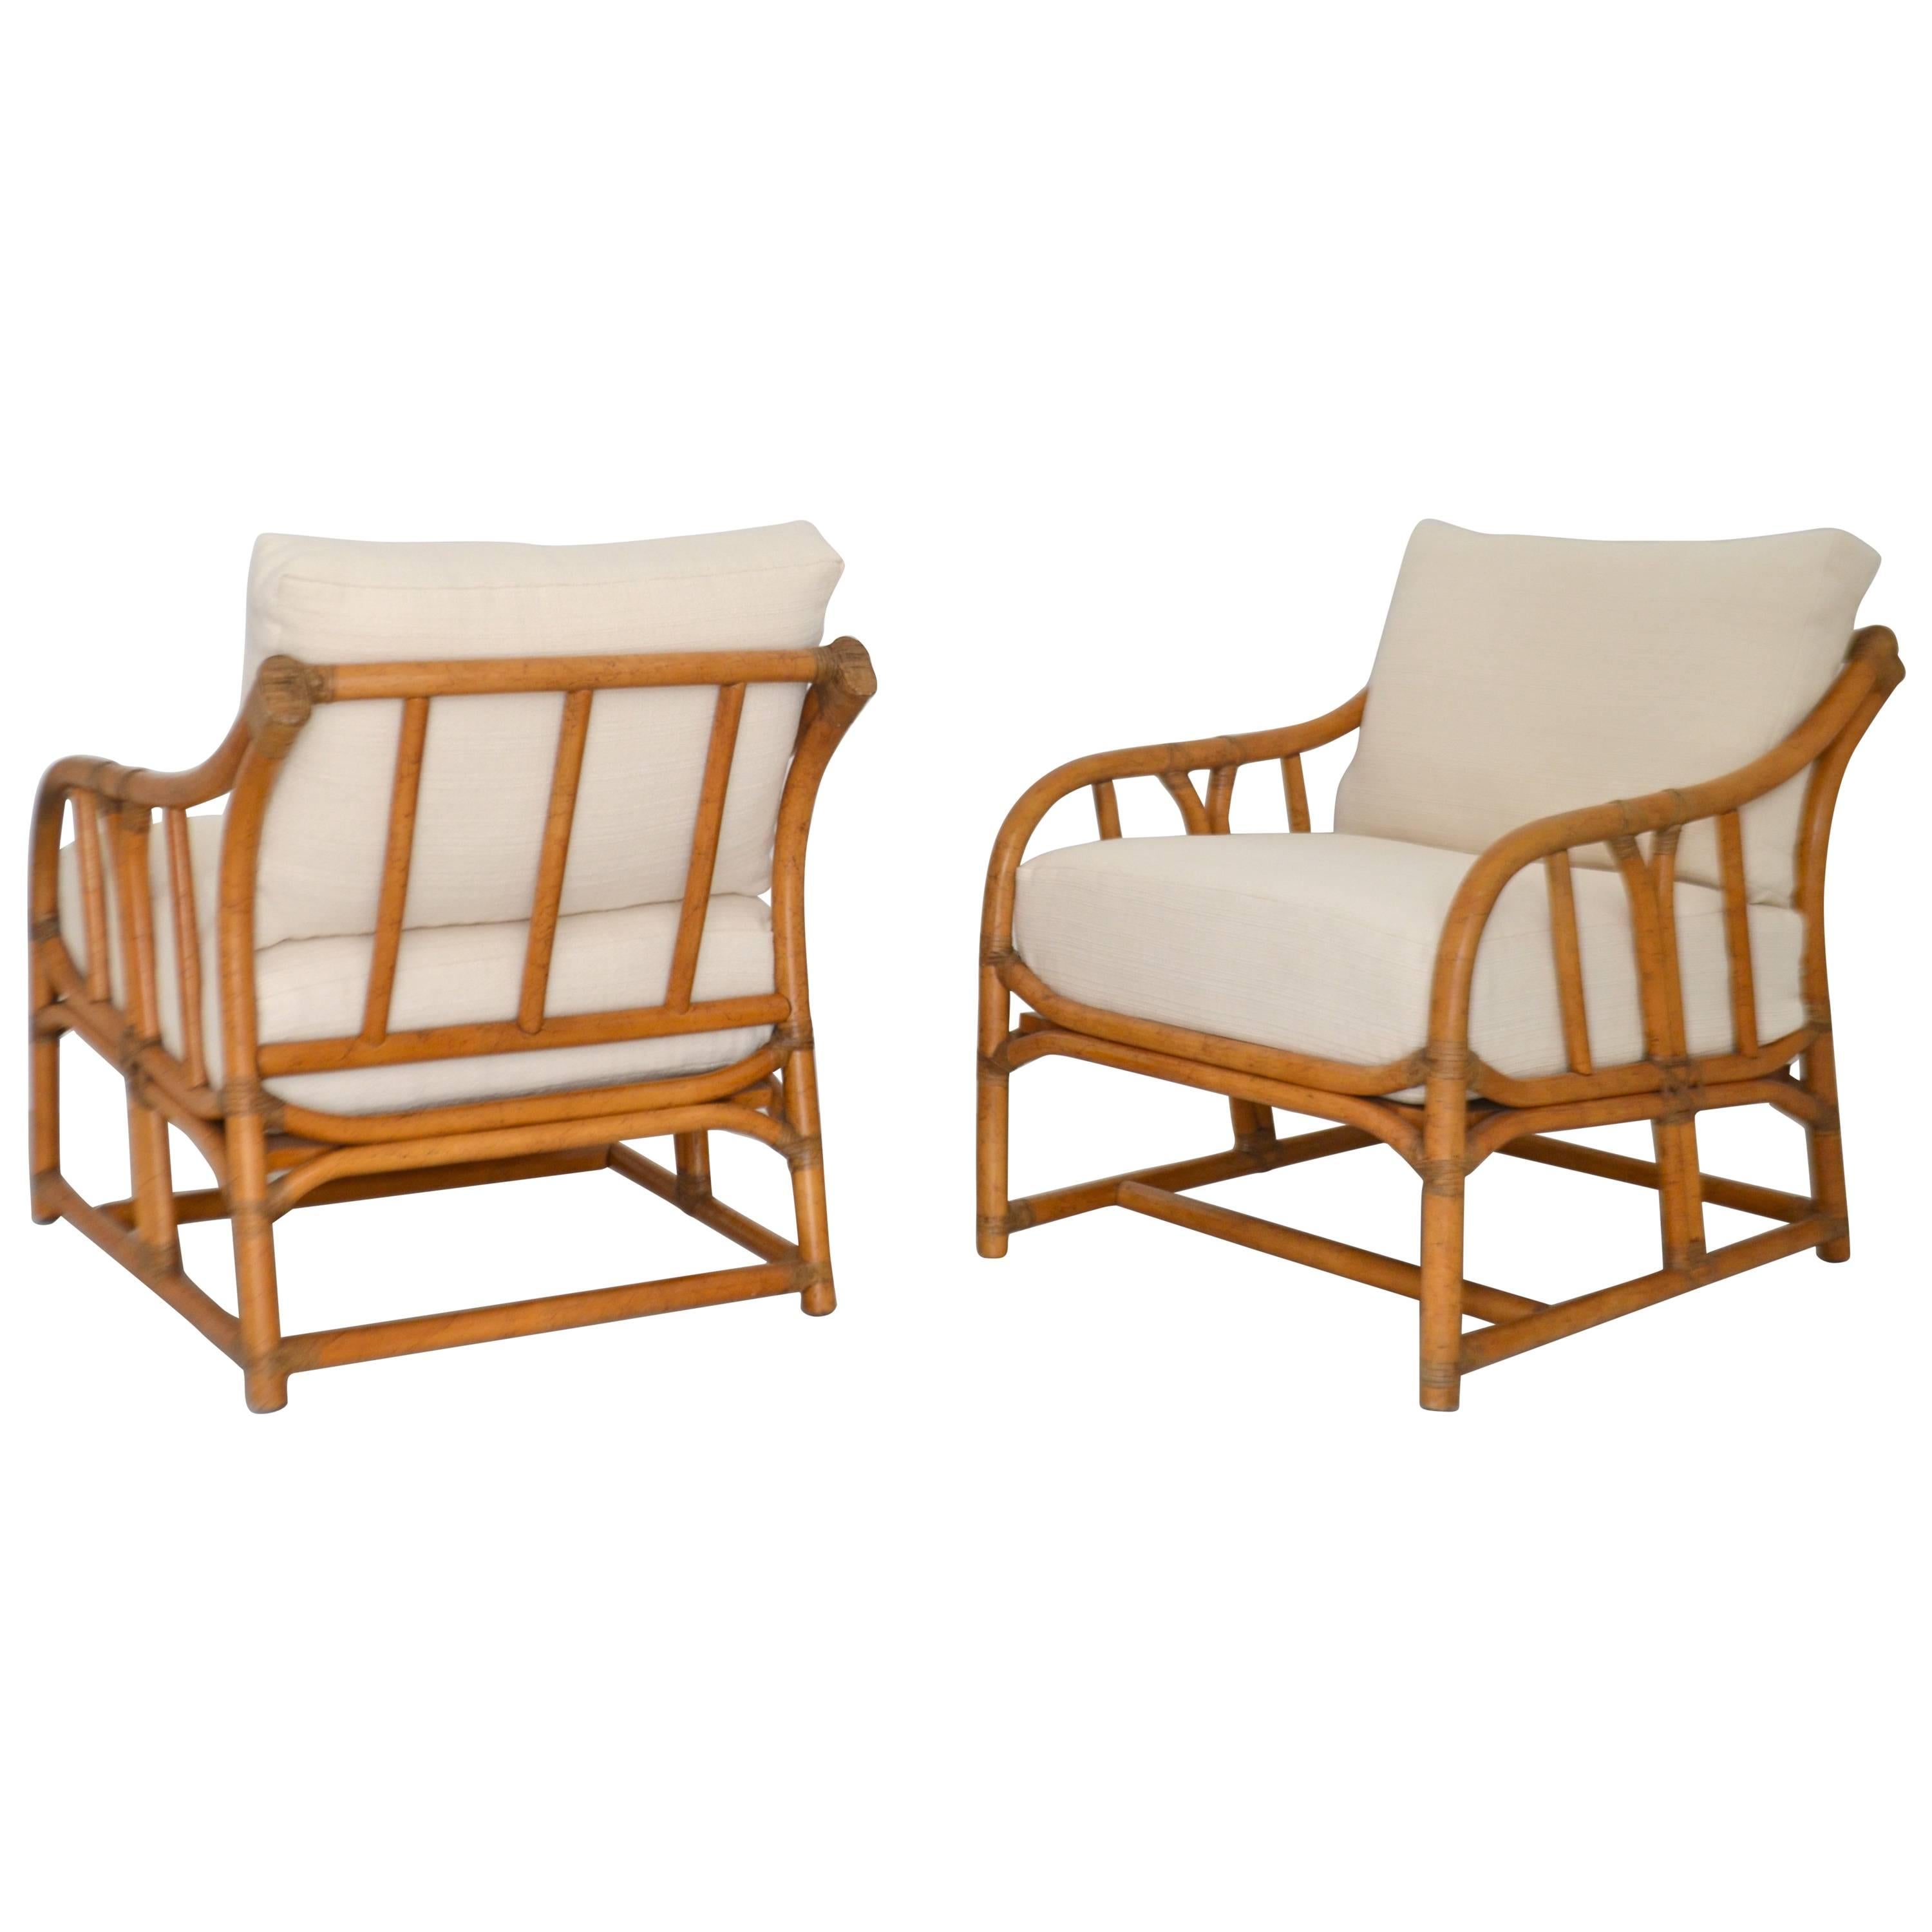 Pair of Mid-Century Bamboo Club Chairs